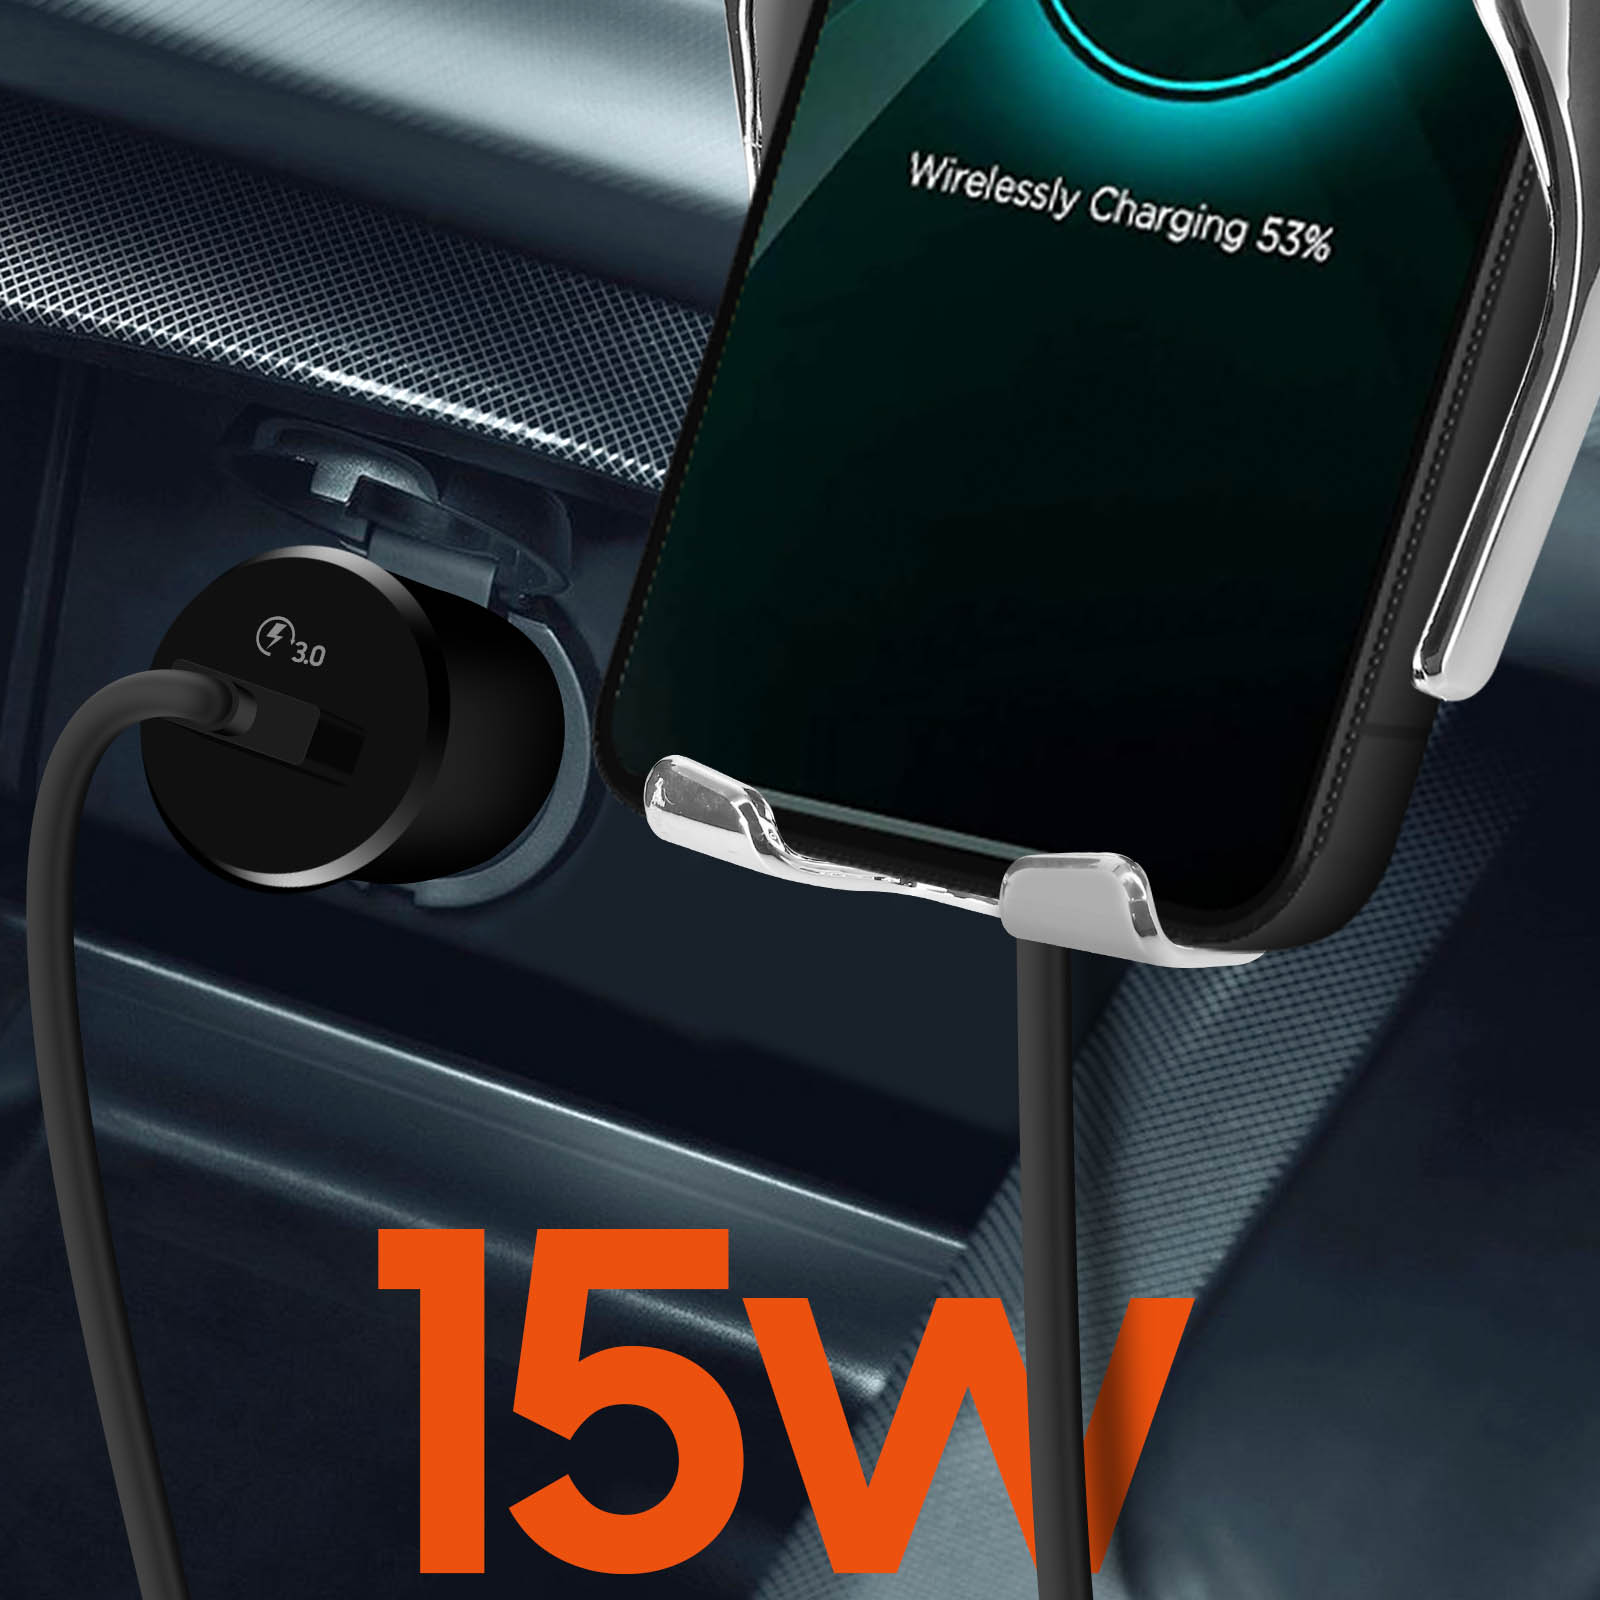 15W QI Chargeur Induction Voiture, Support Telephone Voiture